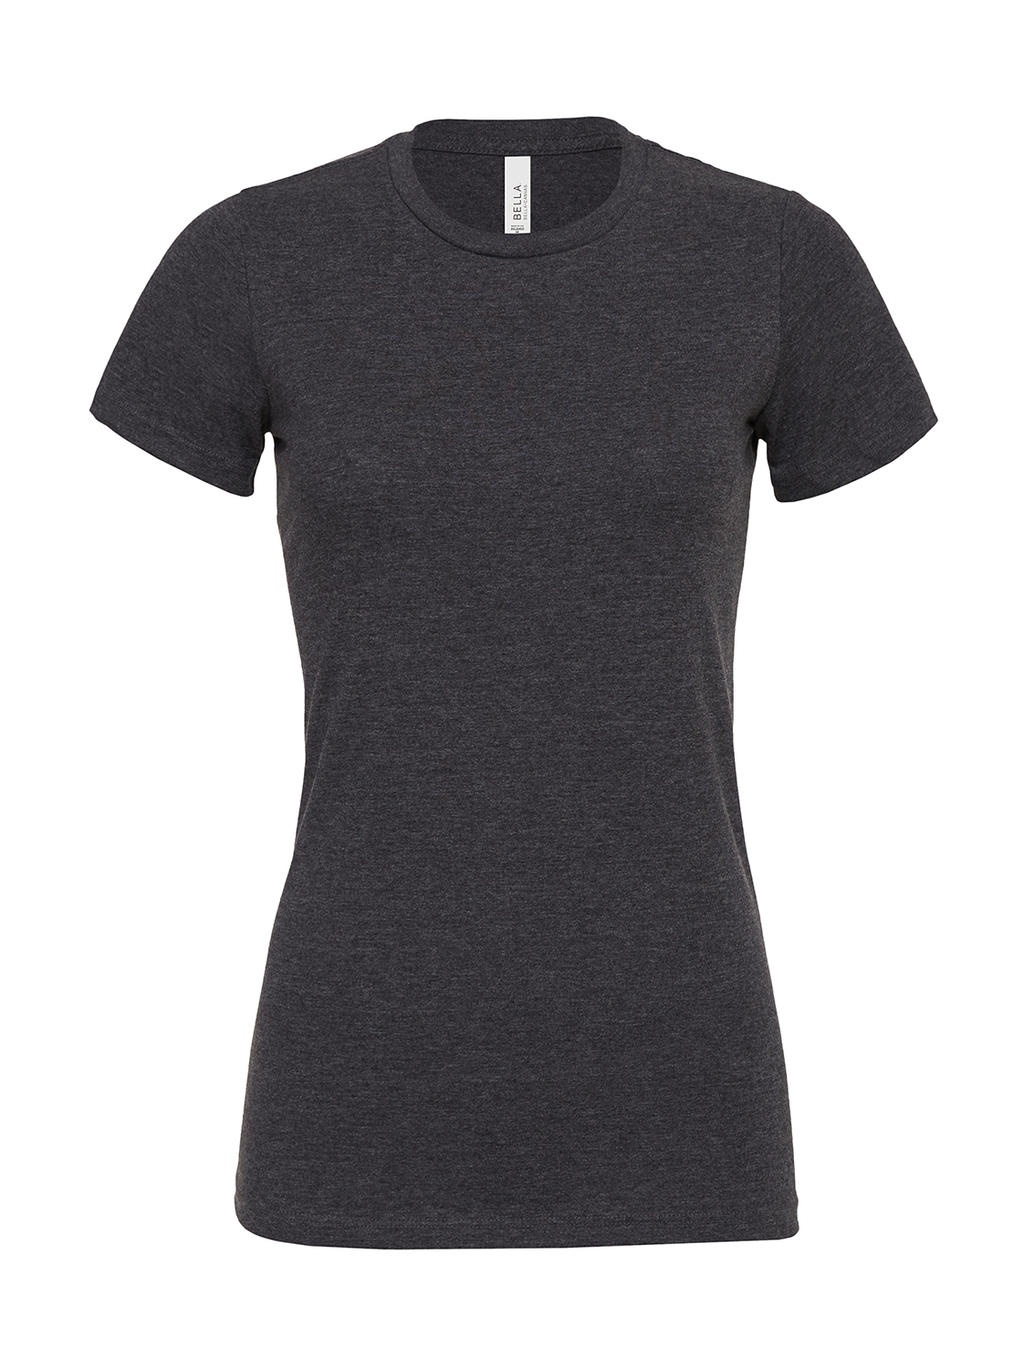  Womens Relaxed Jersey Short Sleeve Tee in Farbe Dark Grey Heather